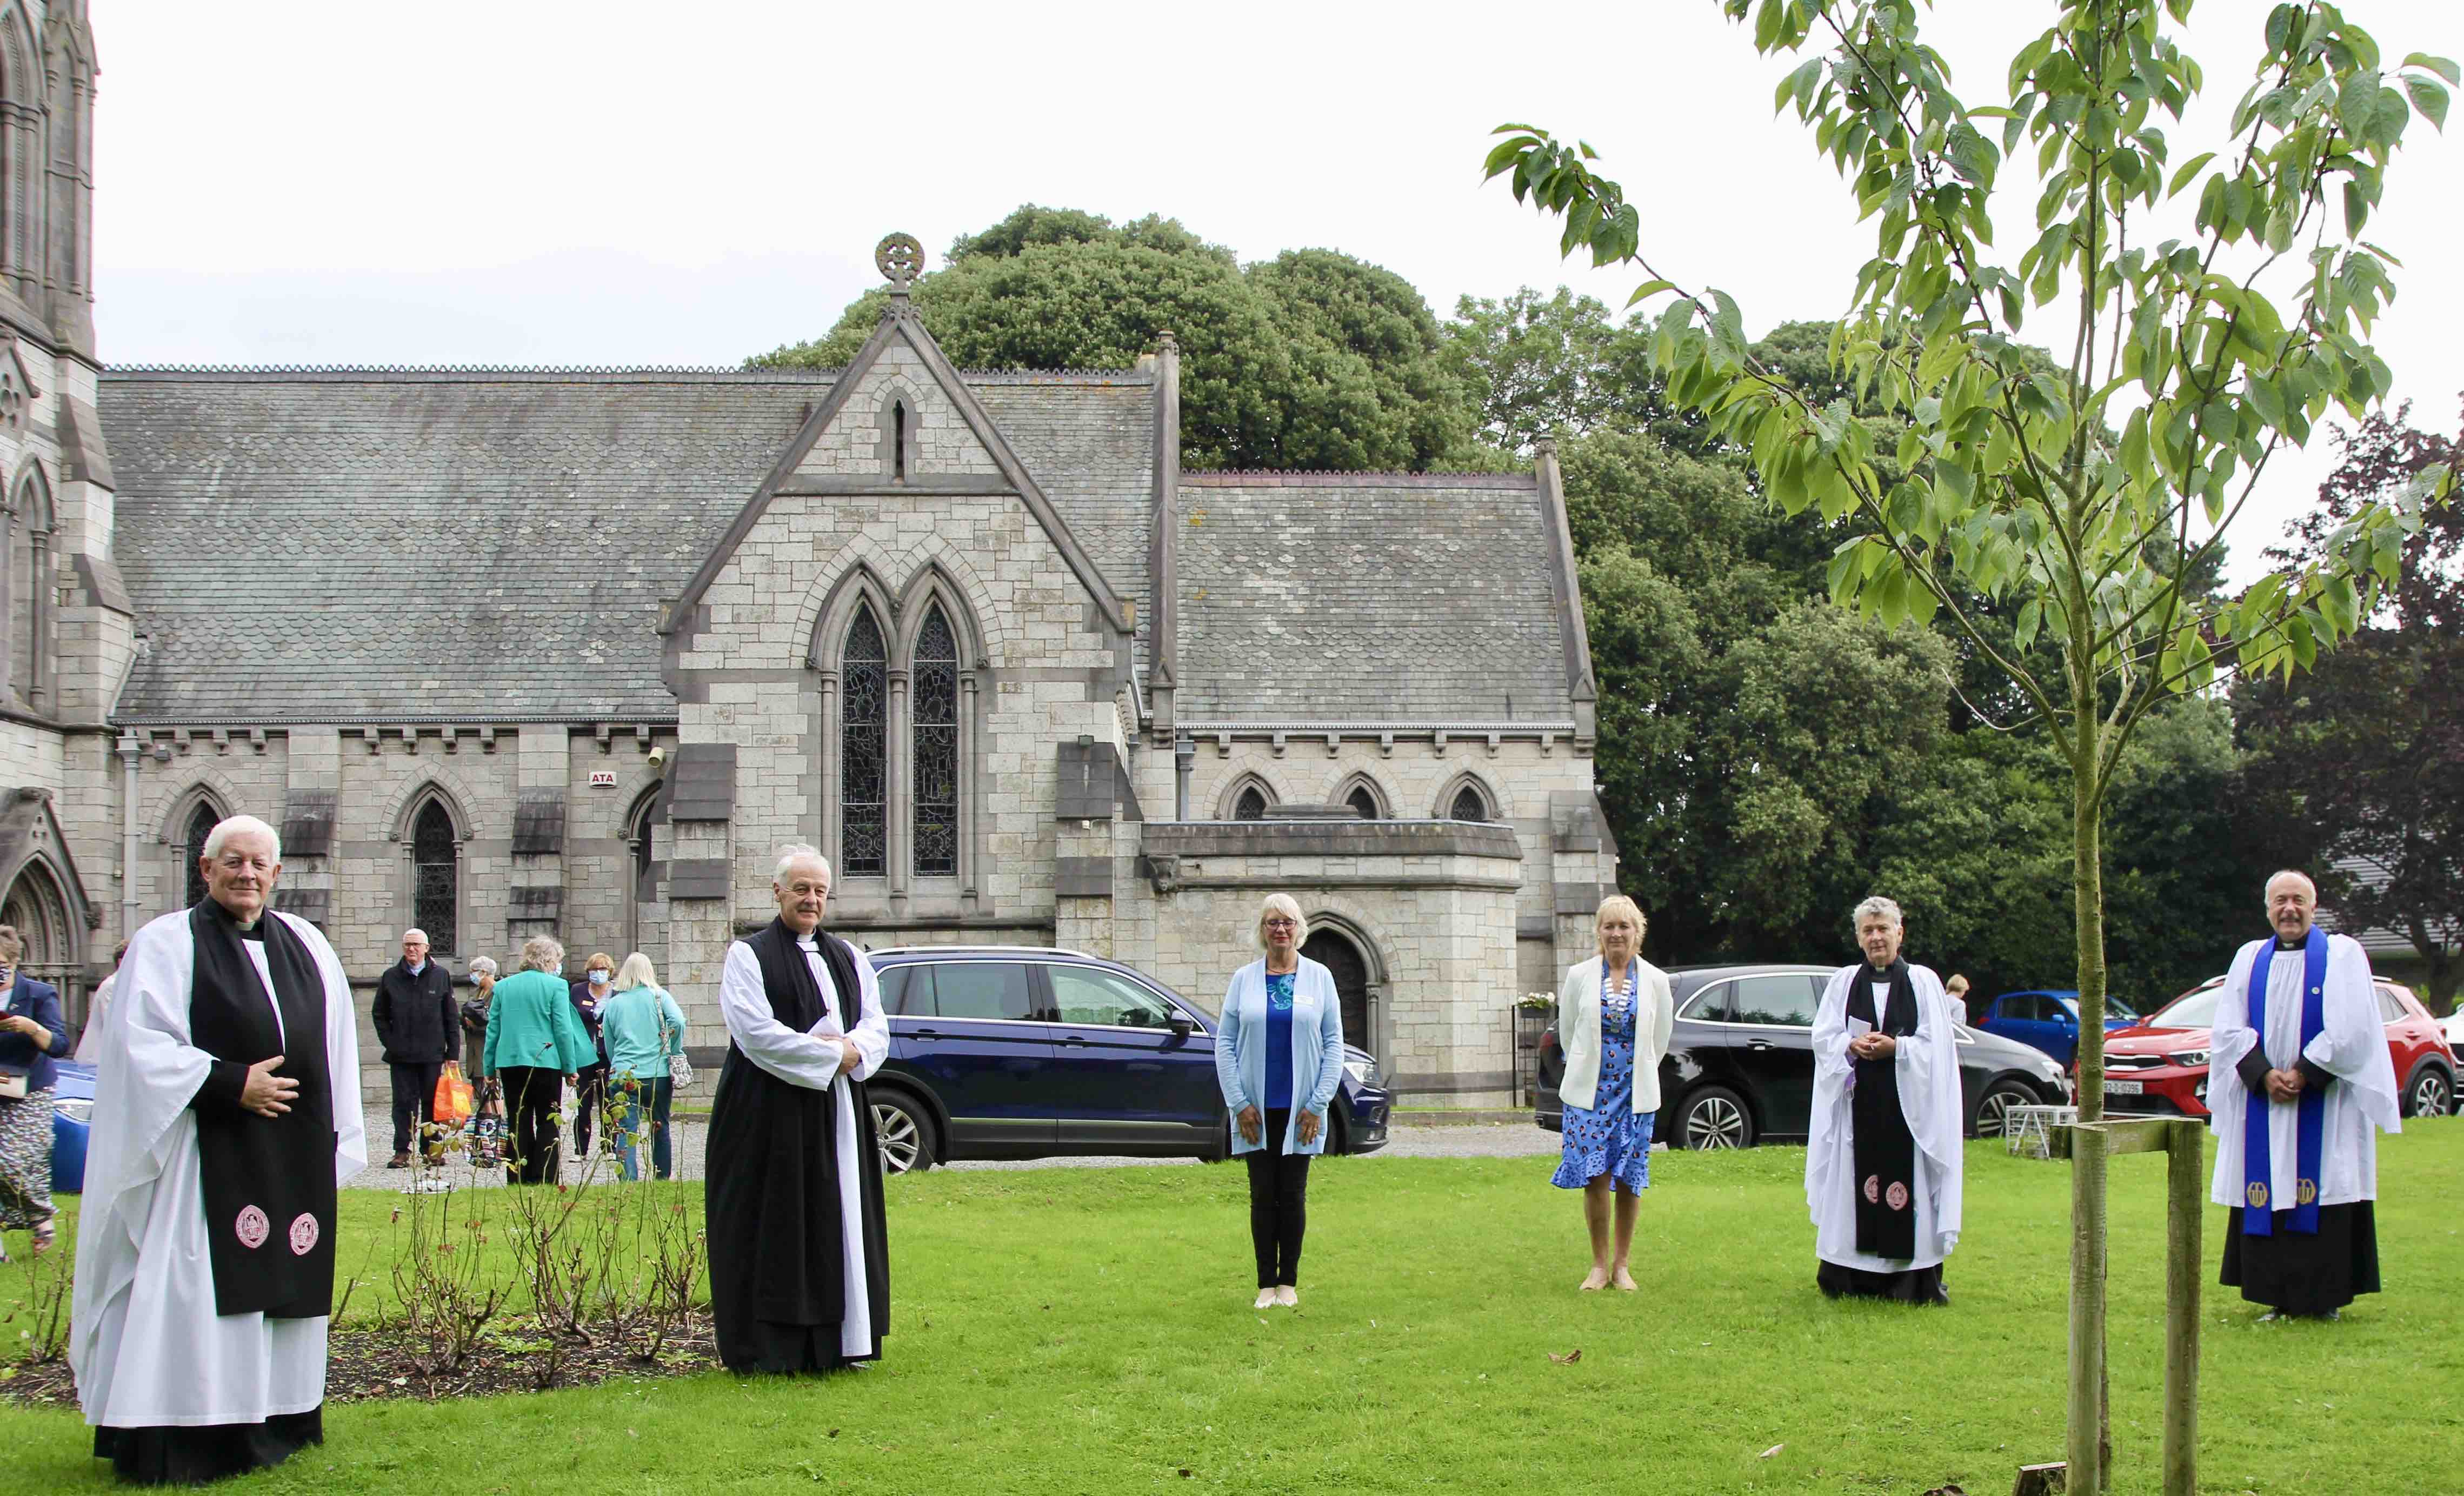 At the tree planted to commemorate the foundation of Mothers' Union in Ireland in Raheny are Canon Robert Deane, Archbishop Michael Jackson, June Butler, Karen Nelson, Canon Aisling Shine and Canon Leonard Ruddock.